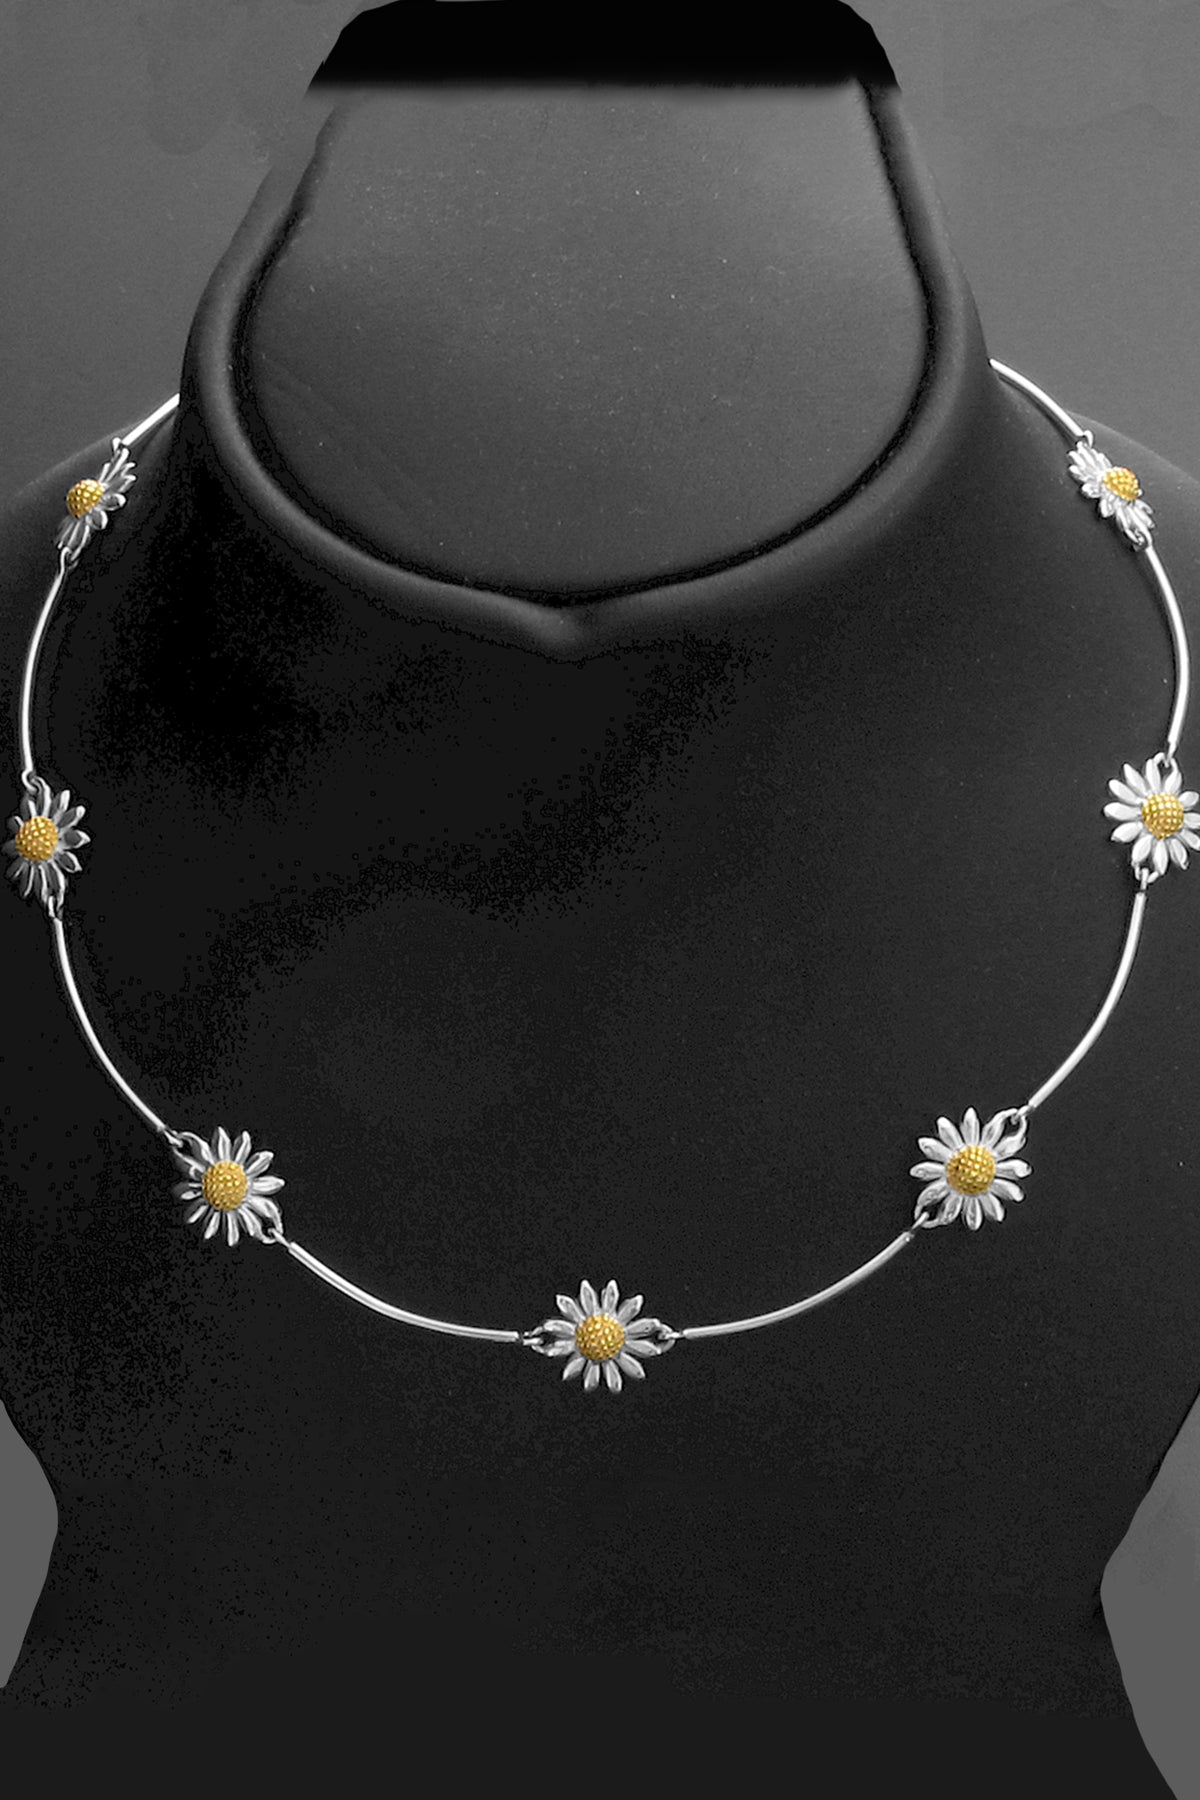 Buy Pressed Flower Necklace, Dry Daisy Pendant, Long Pendant Necklace, Bee  Necklace, Resin Jewellery, Real Dry Flower Jewelry, Boho Necklace UK Online  in India - Etsy